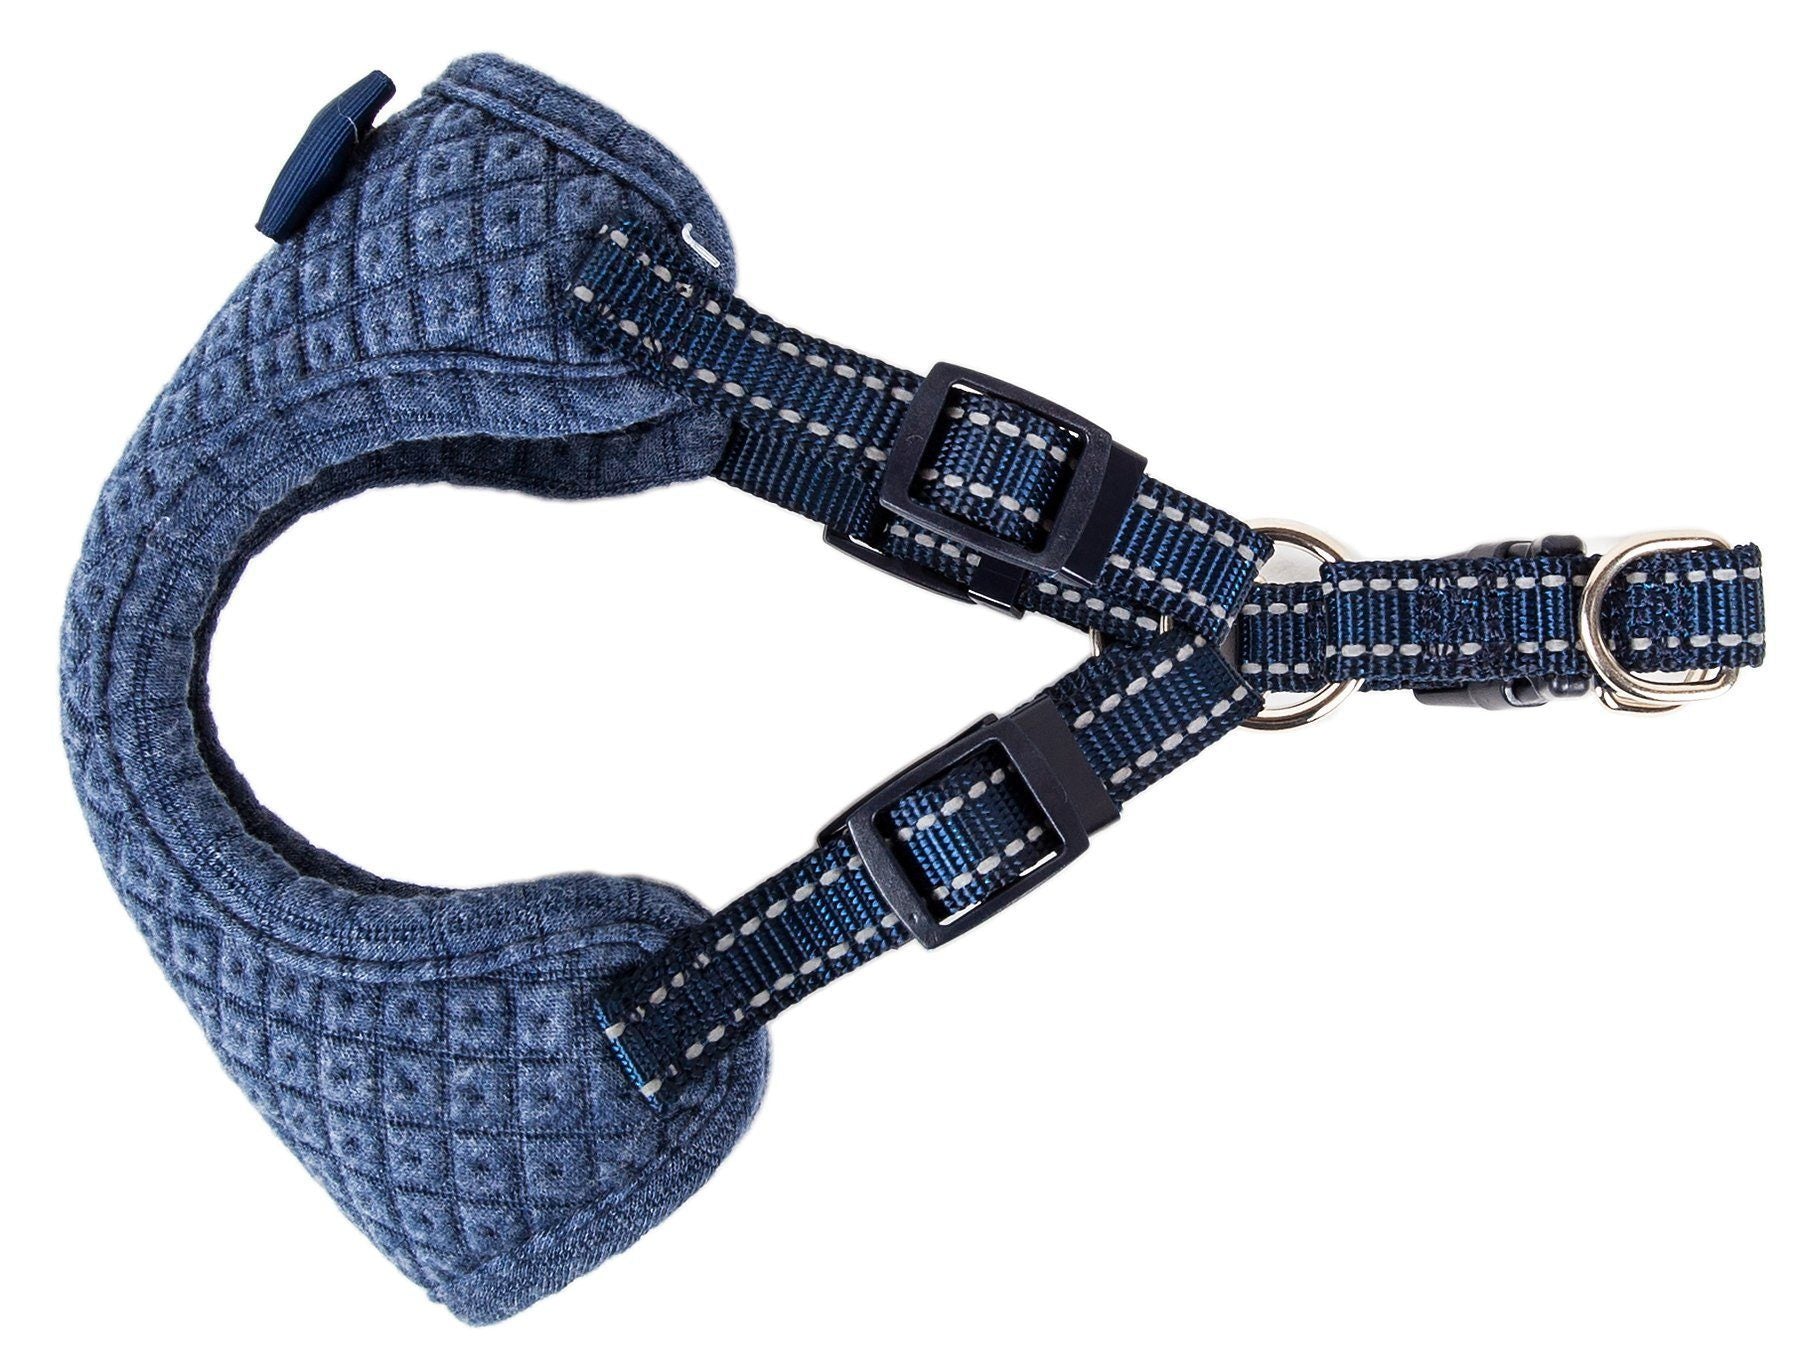 Pet Life ®  'Flam-Bowyant' Mesh Reversed and Adjustable Dog Harness  